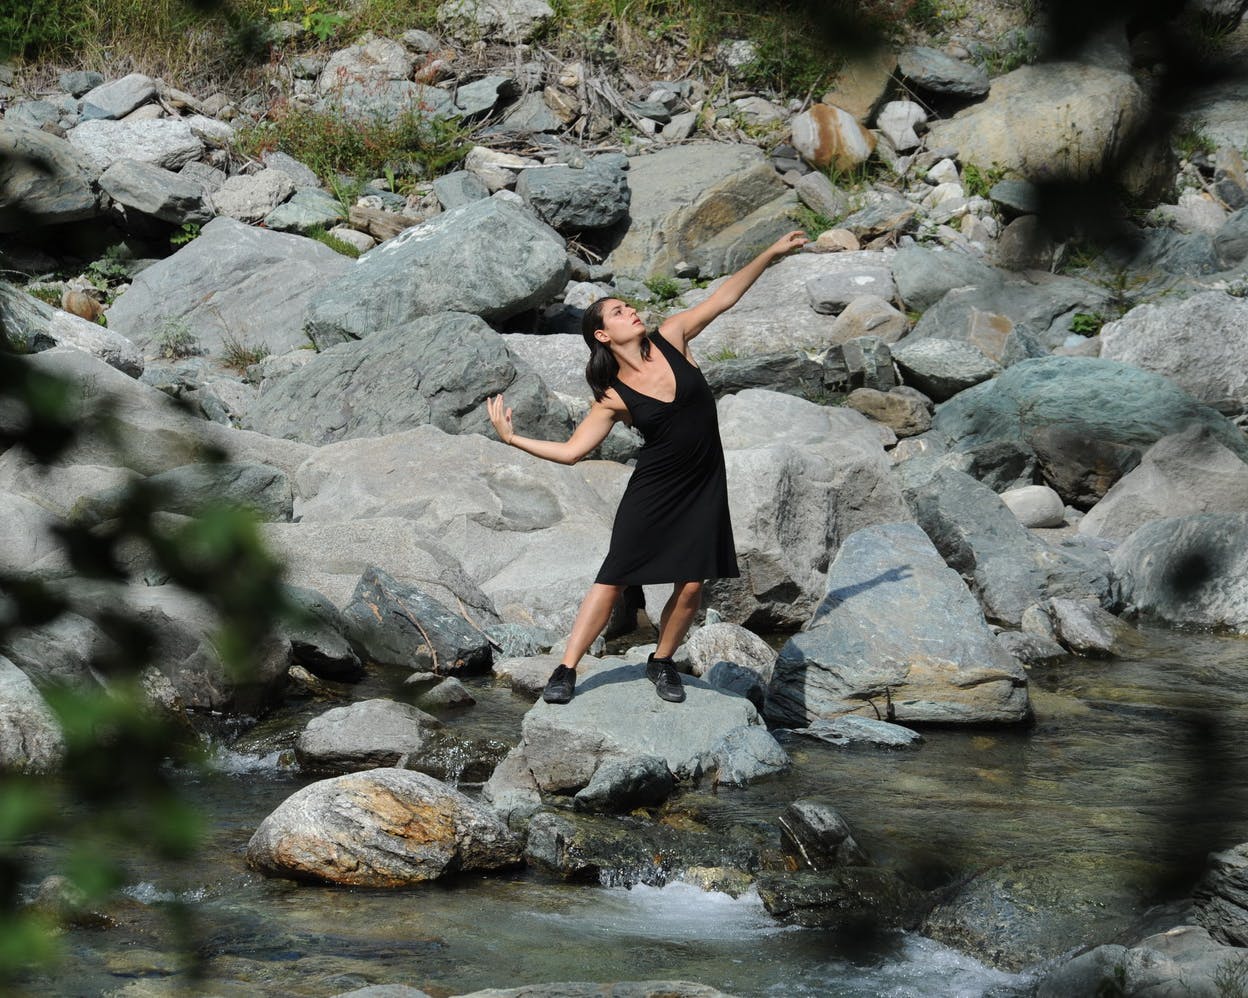 The dancer is standing on a river rock.